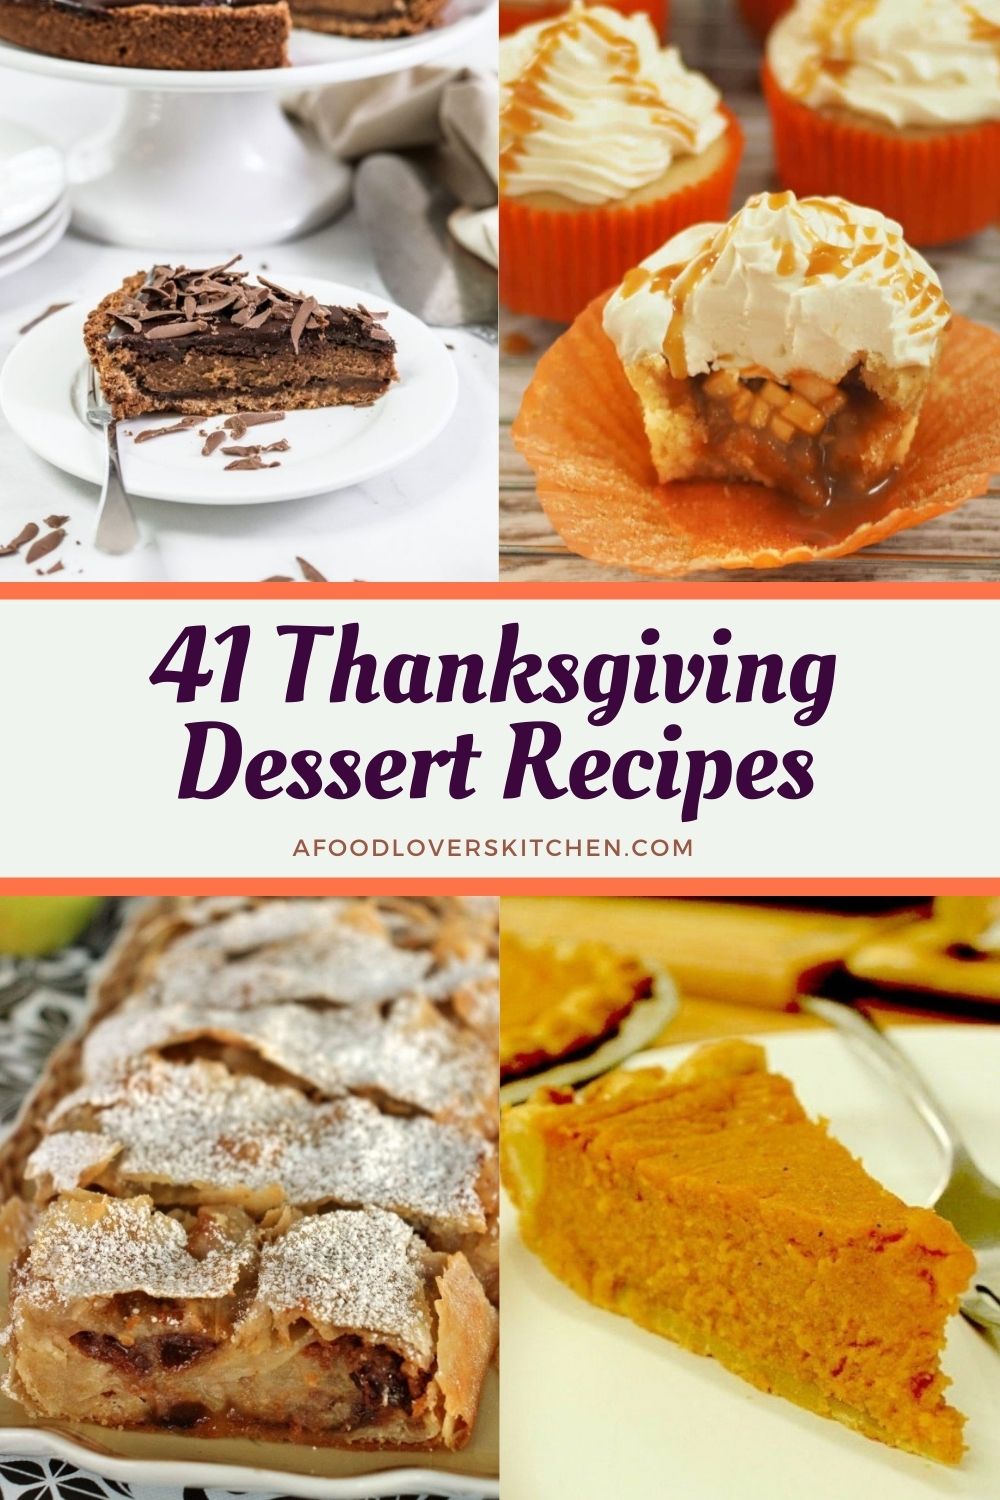 41 Delicious Thanksgiving Dessert Recipes - A Food Lover's Kitchen